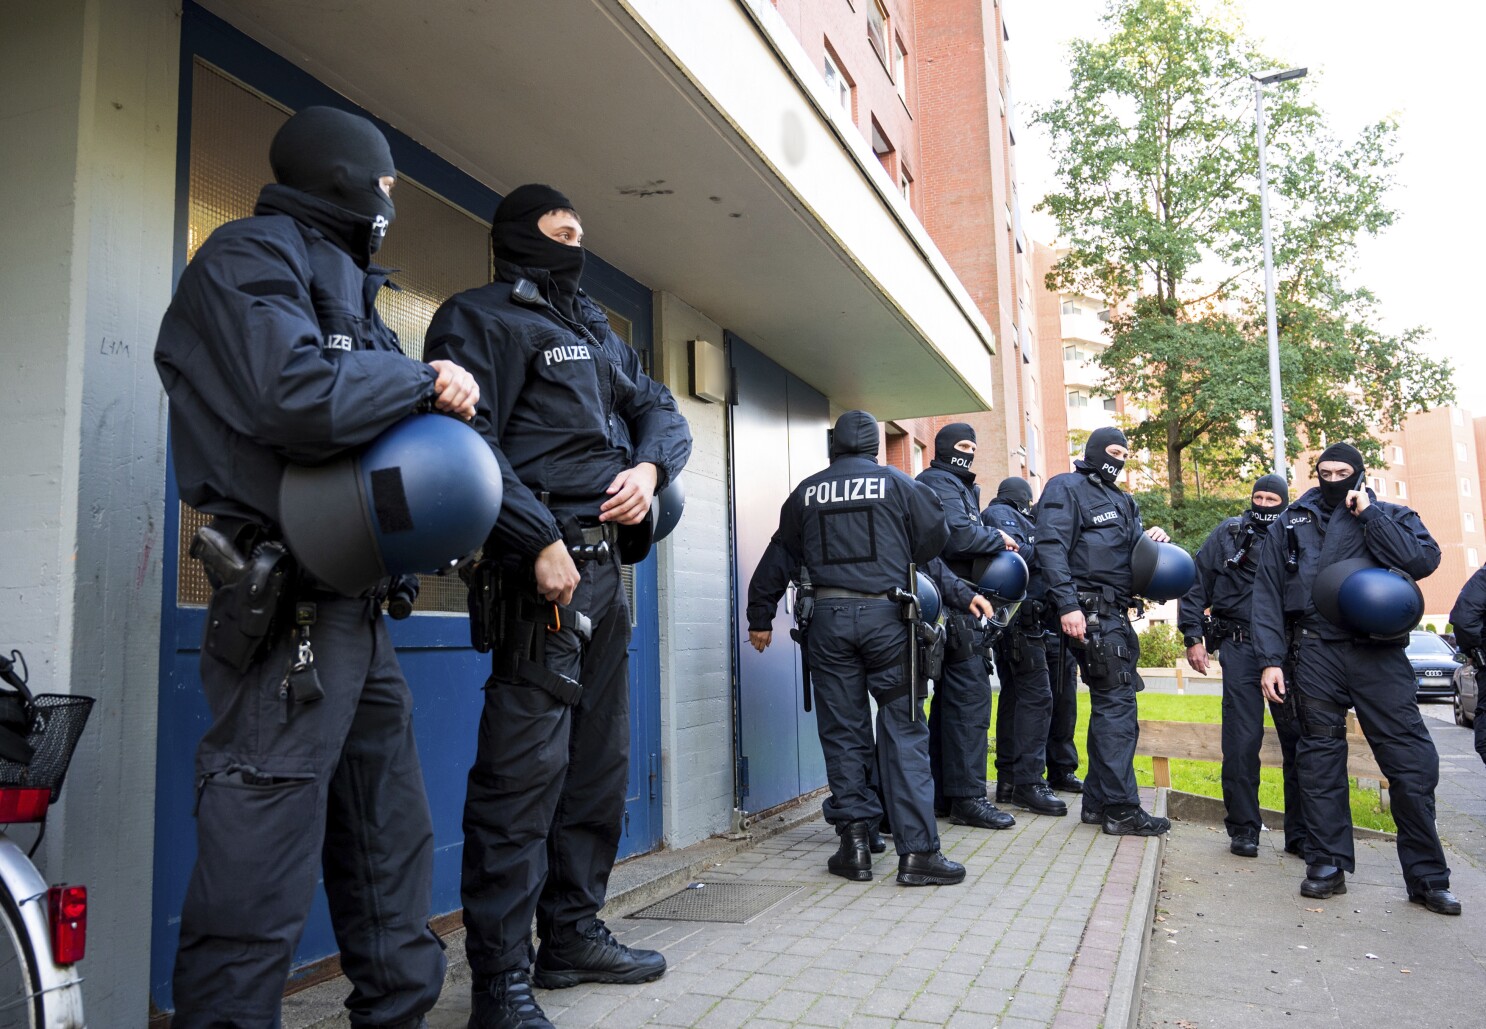 German police raid locations across the country in connection with